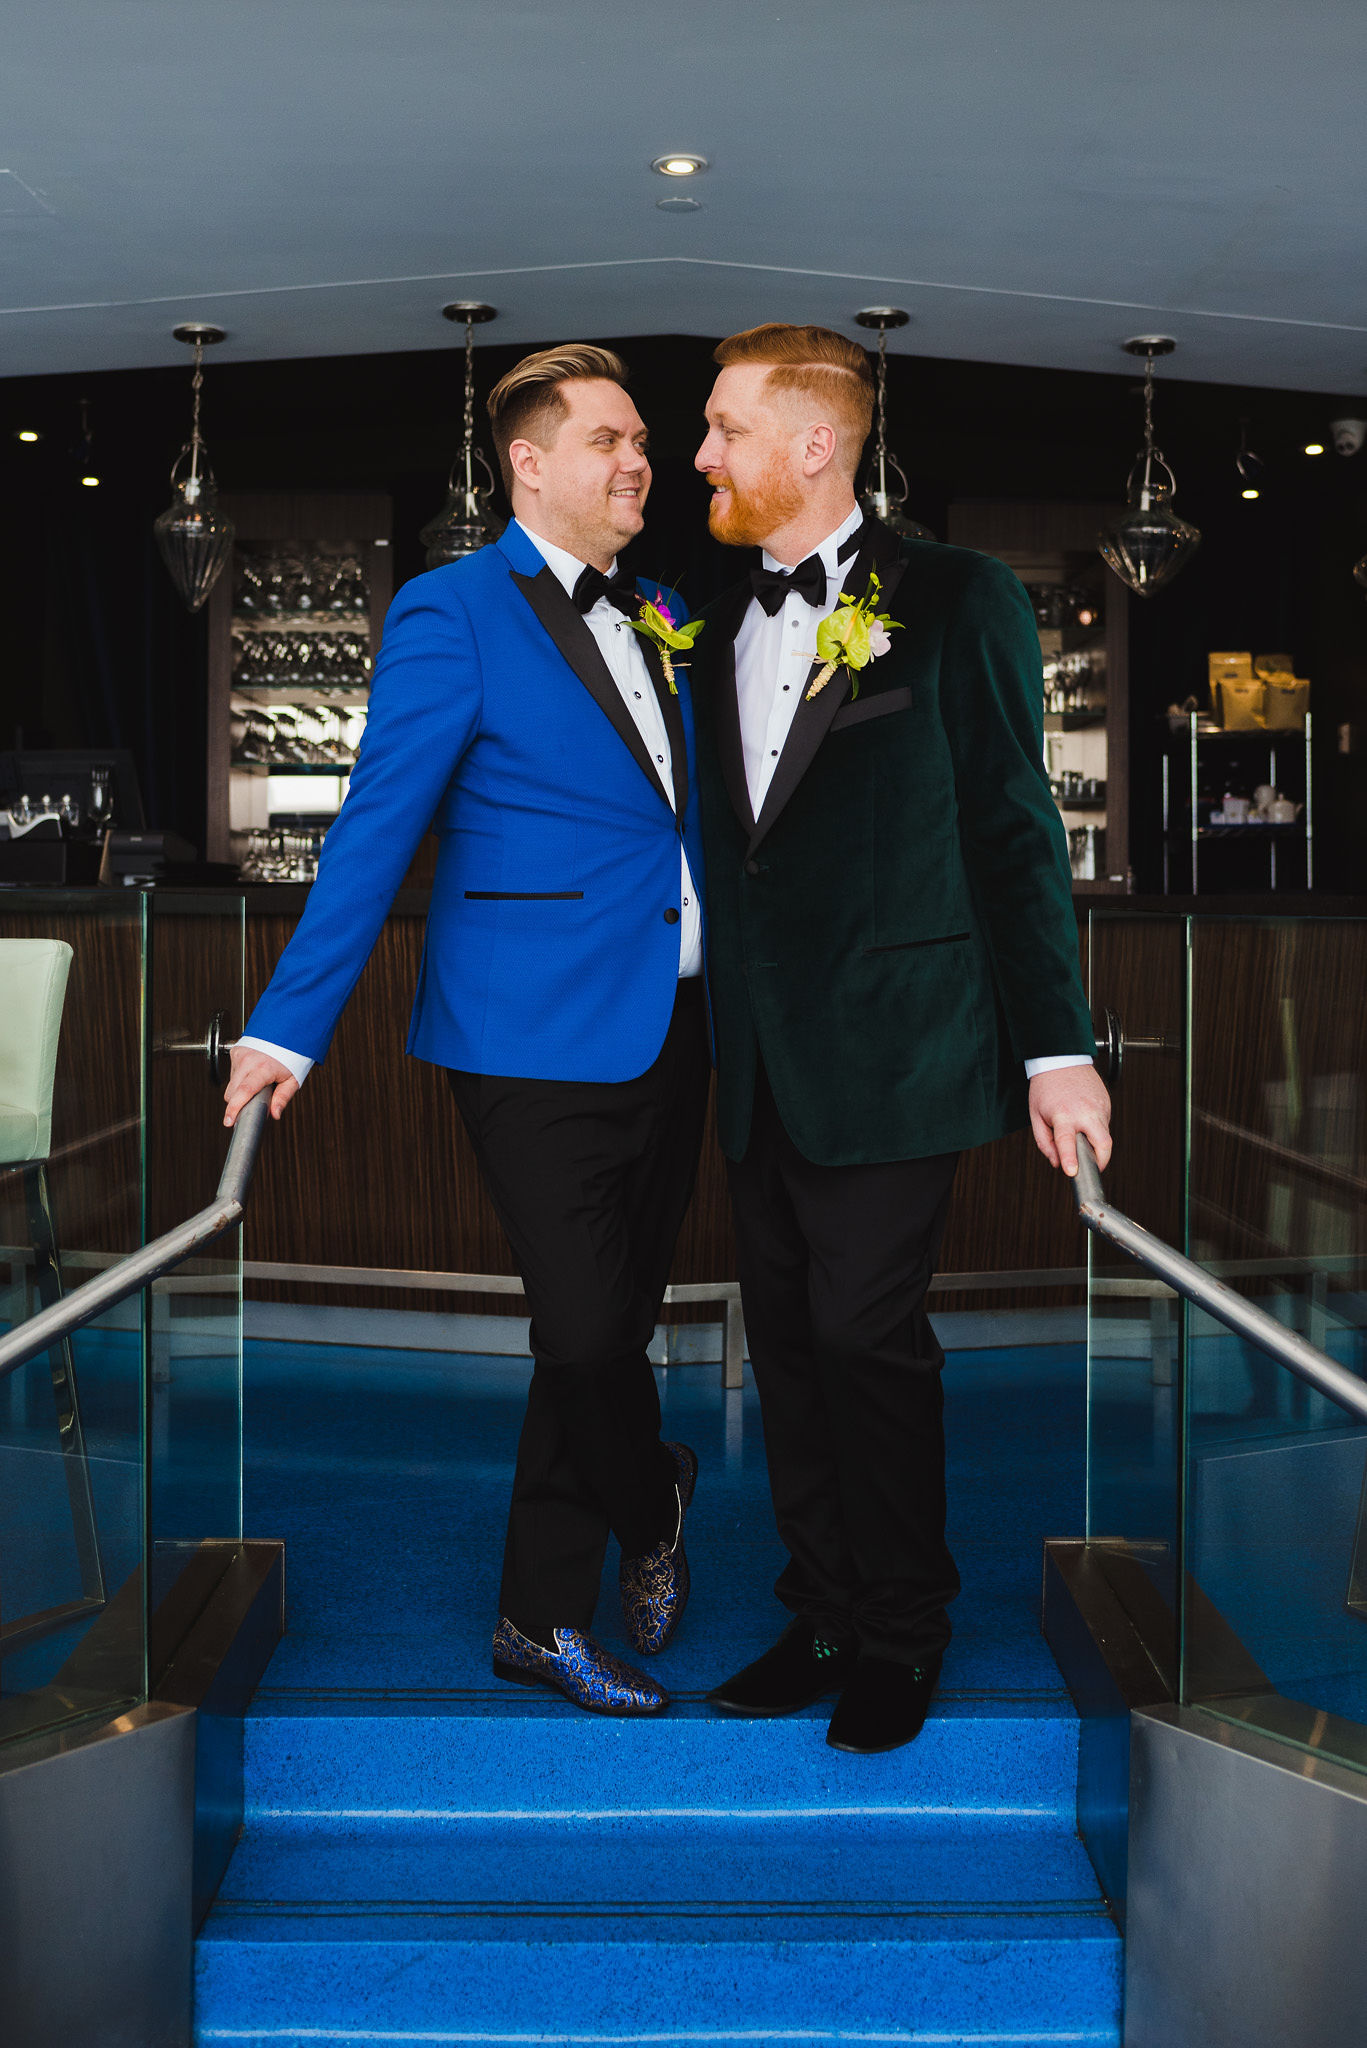 grooms facing each other while standing in front of the bar at the Hilton hotel in Niagara Falls before their wedding